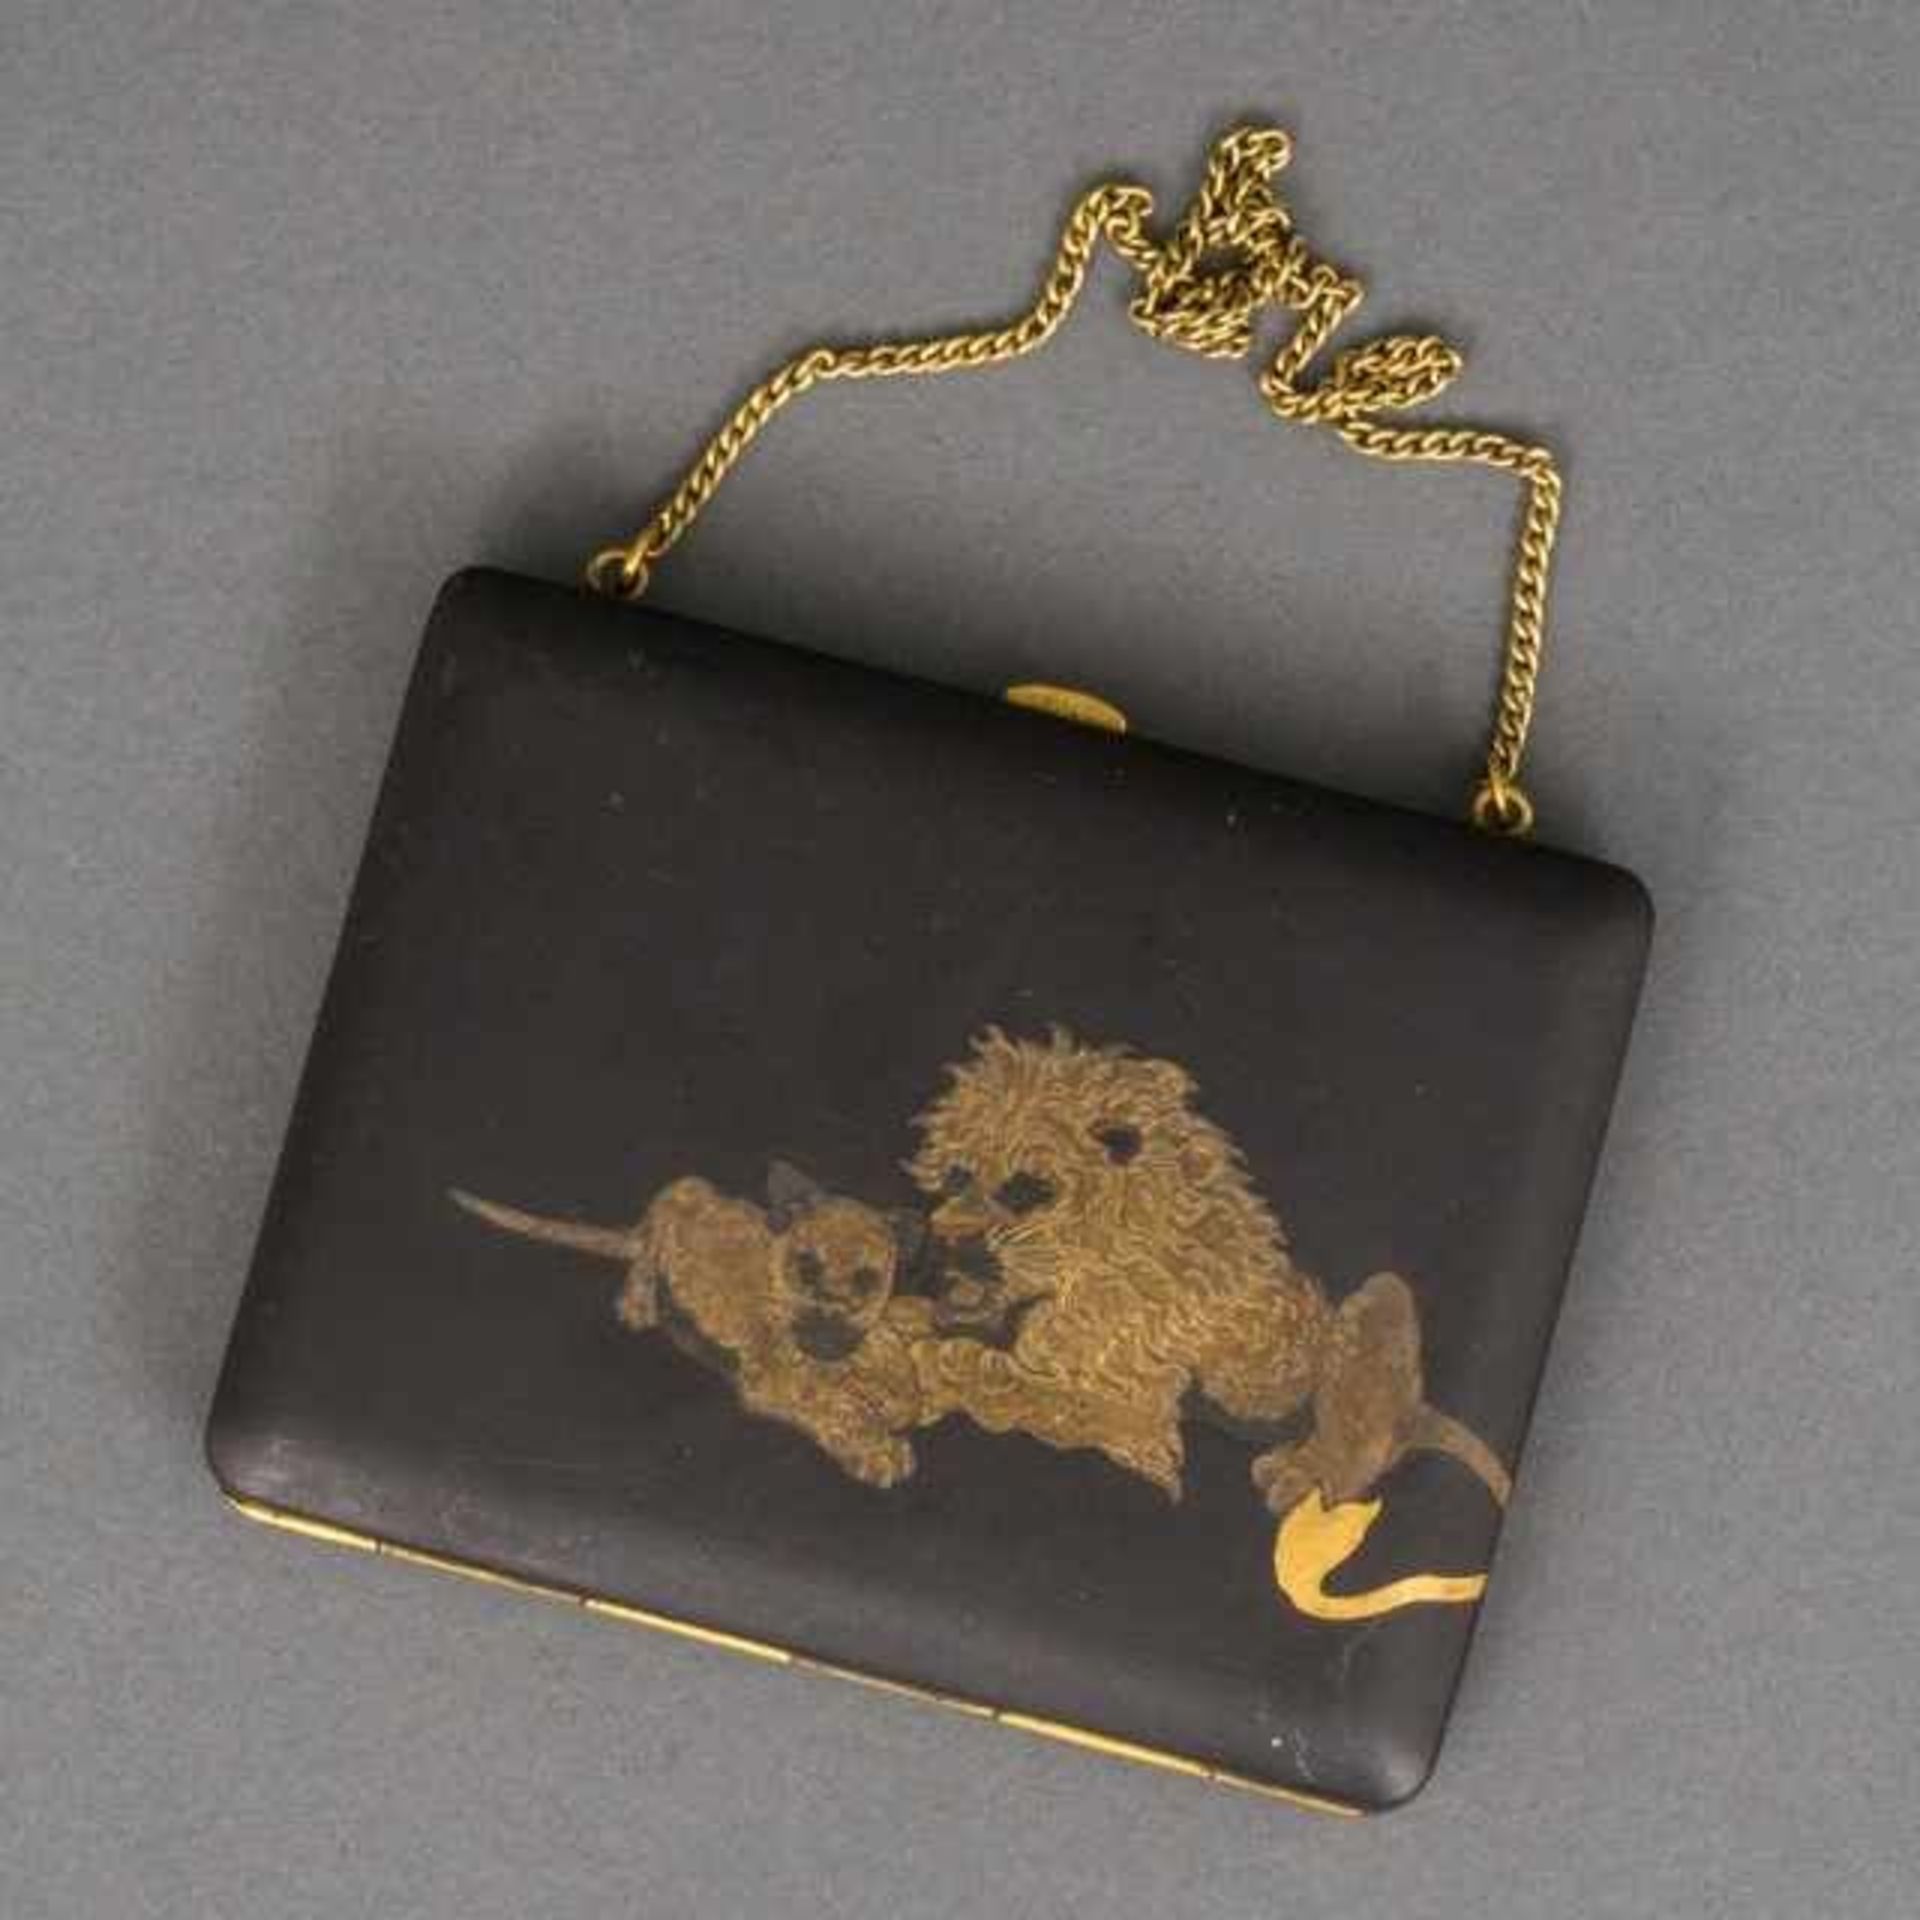 Metal ladies compact and cigarette case, the lid with engraved decoration of two lions, the inside